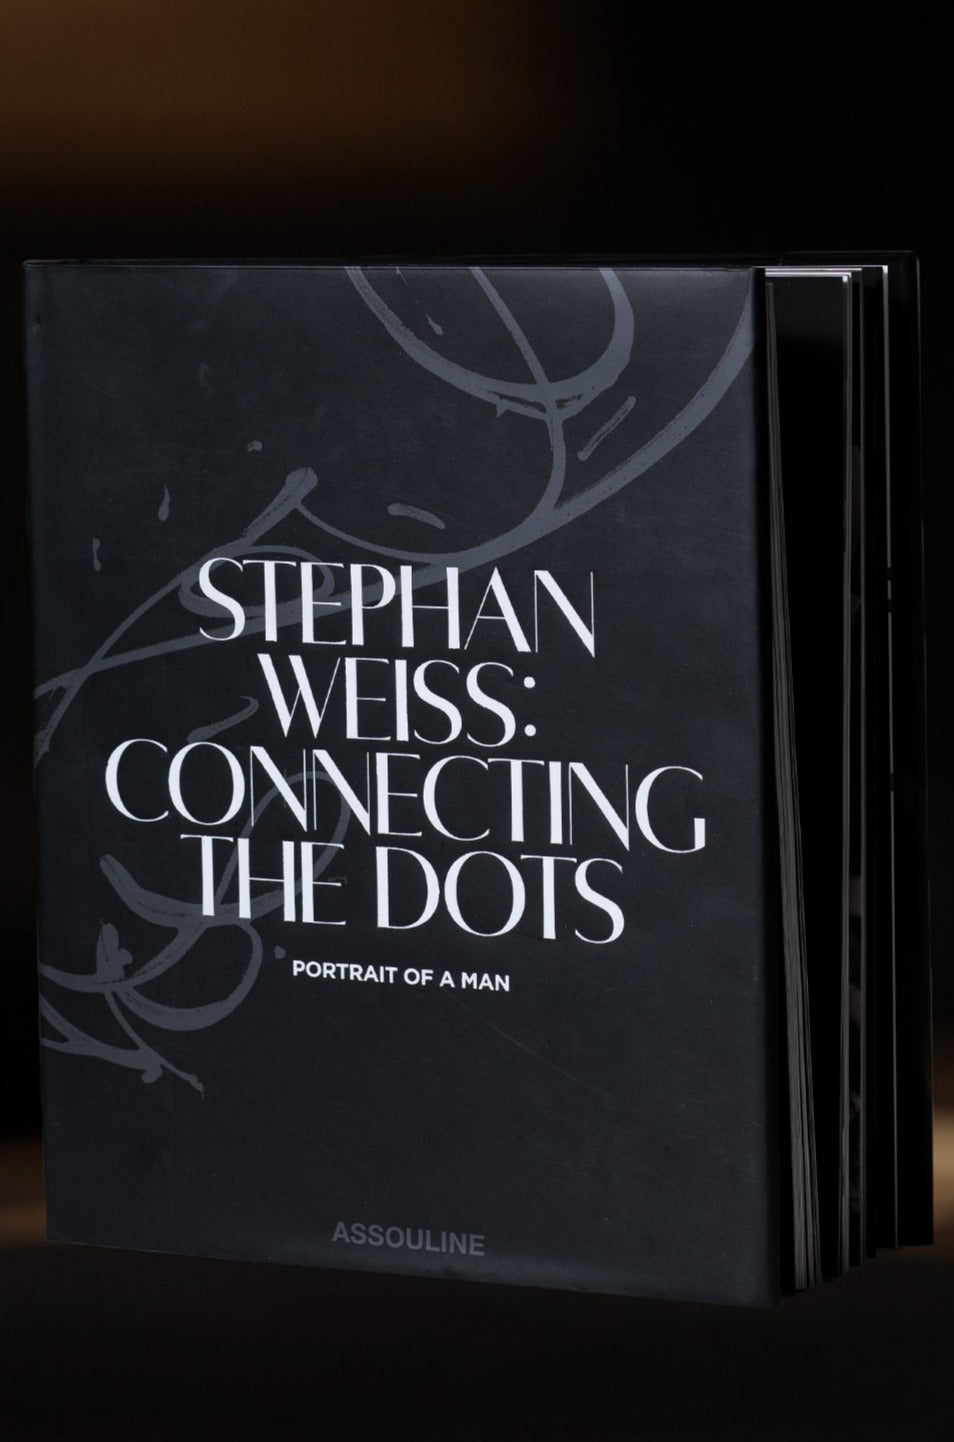 Stephan Weiss: Connecting the Dots